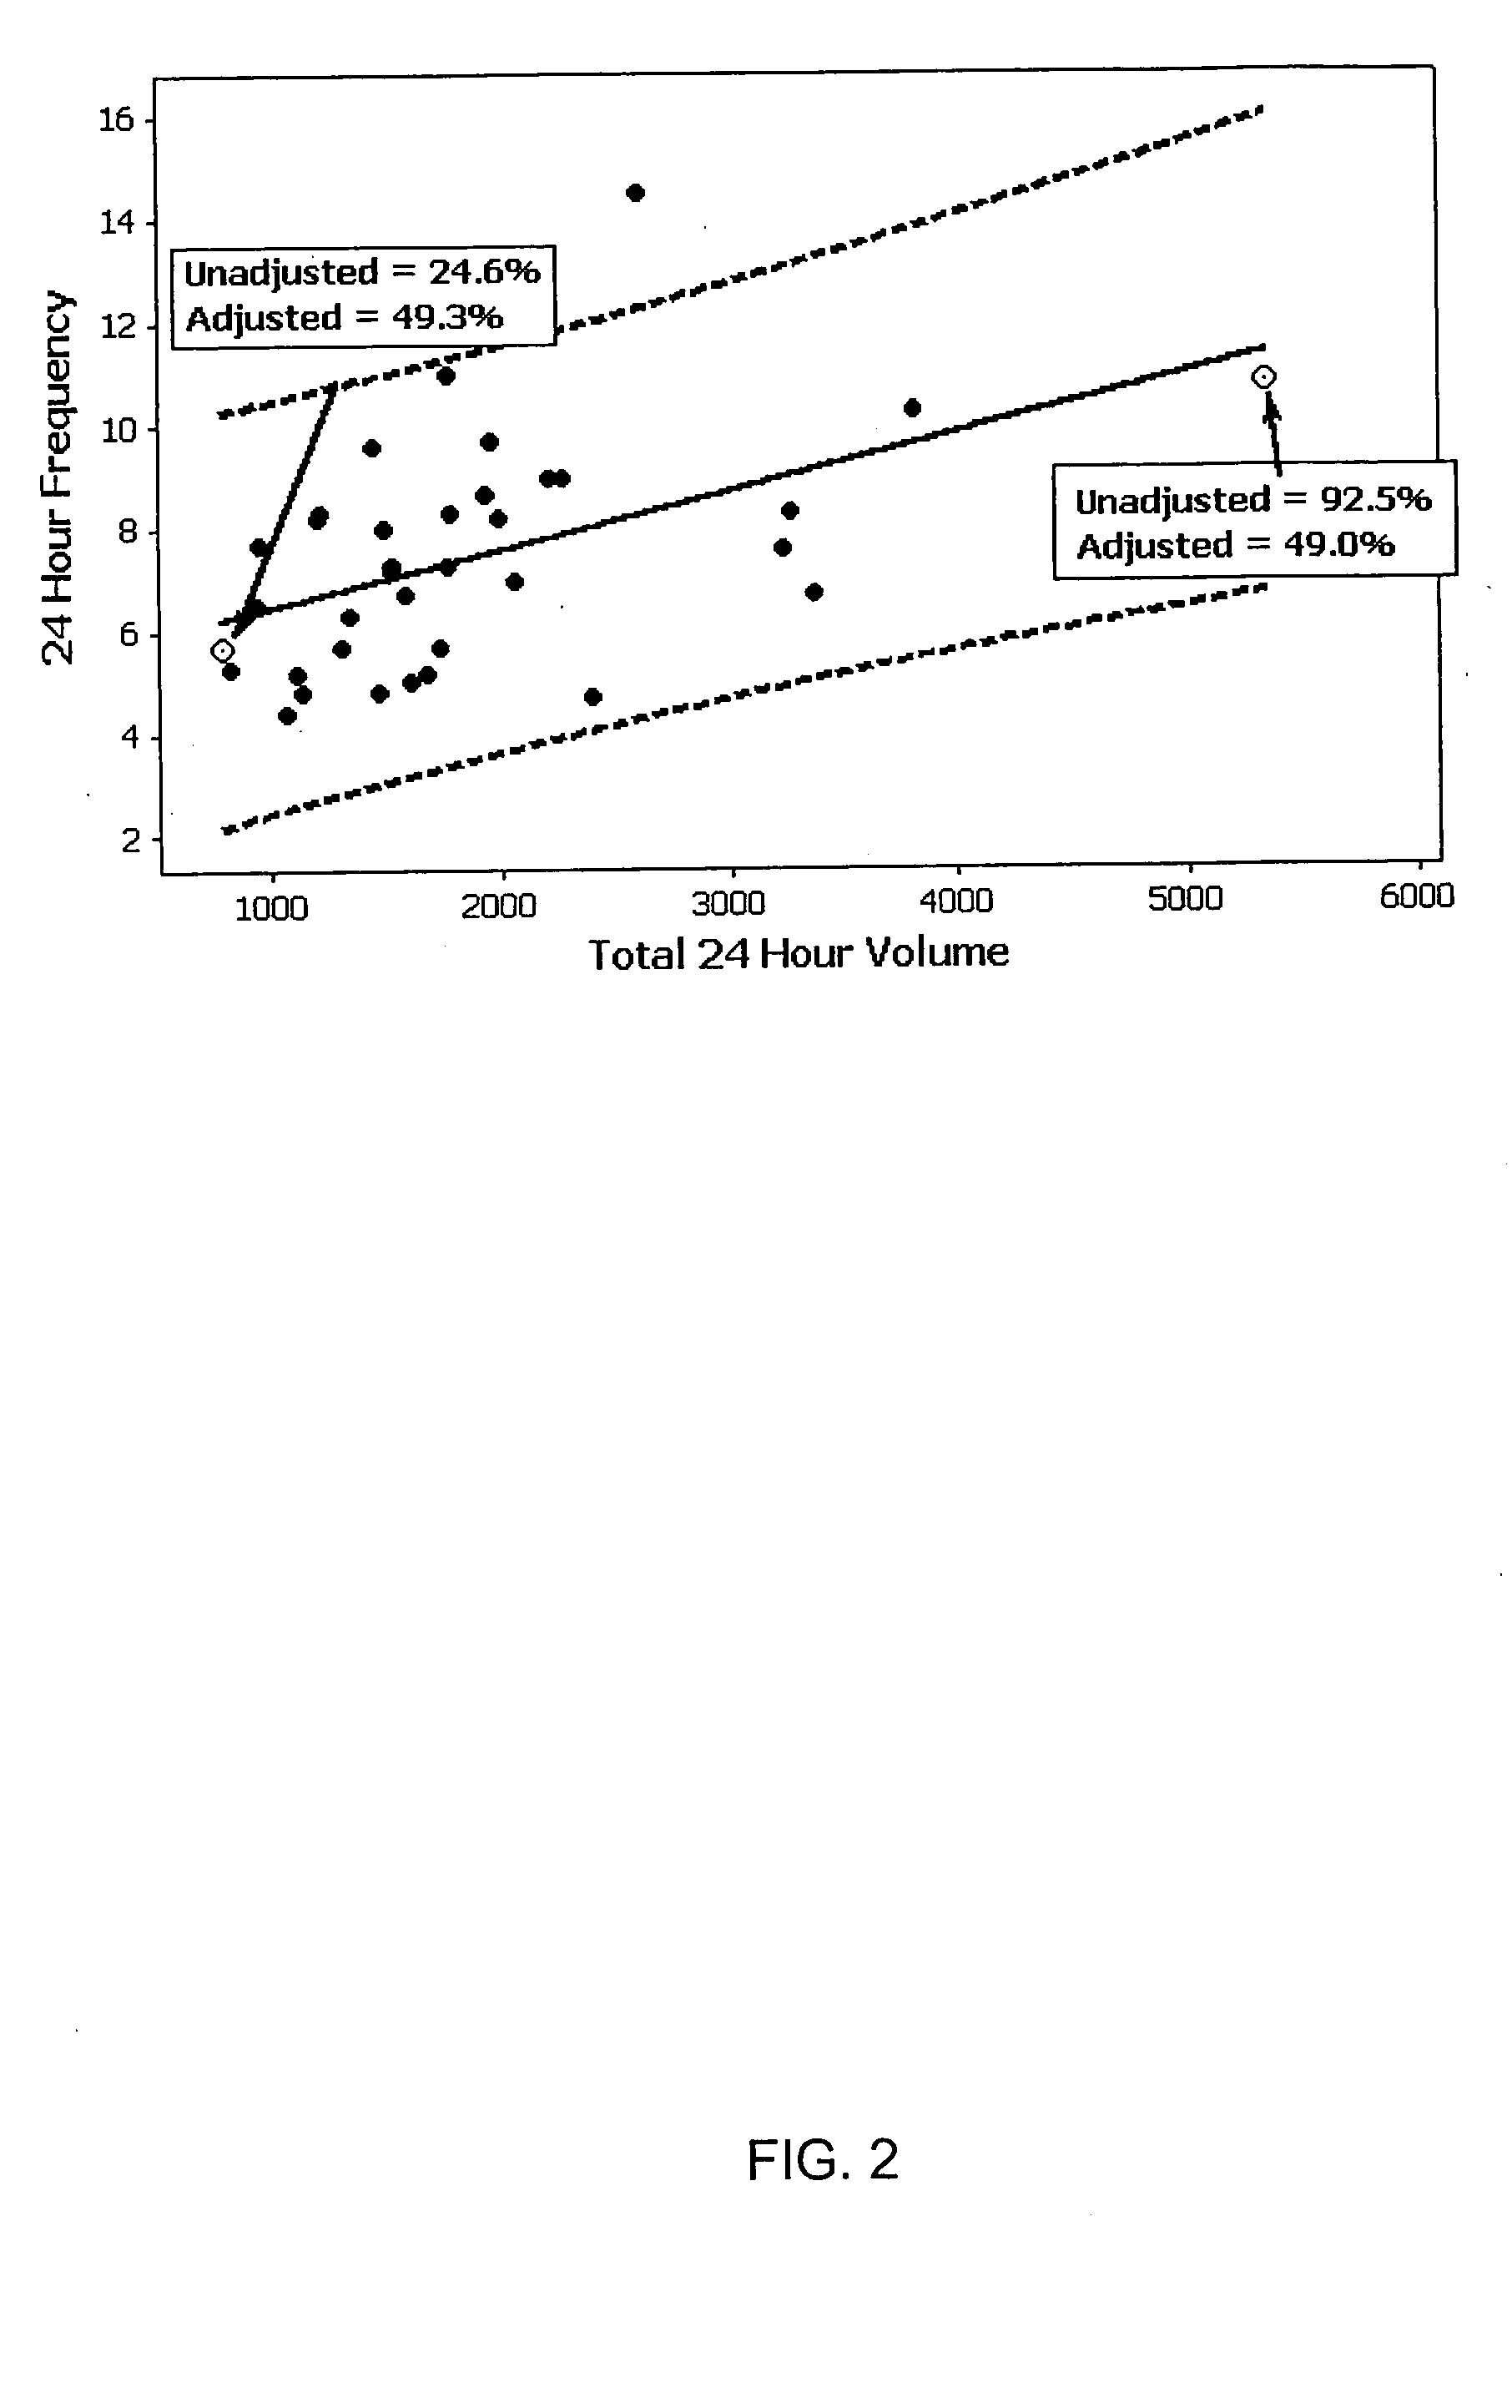 Method of adjusting bladder capacity and voiding frequency measurements